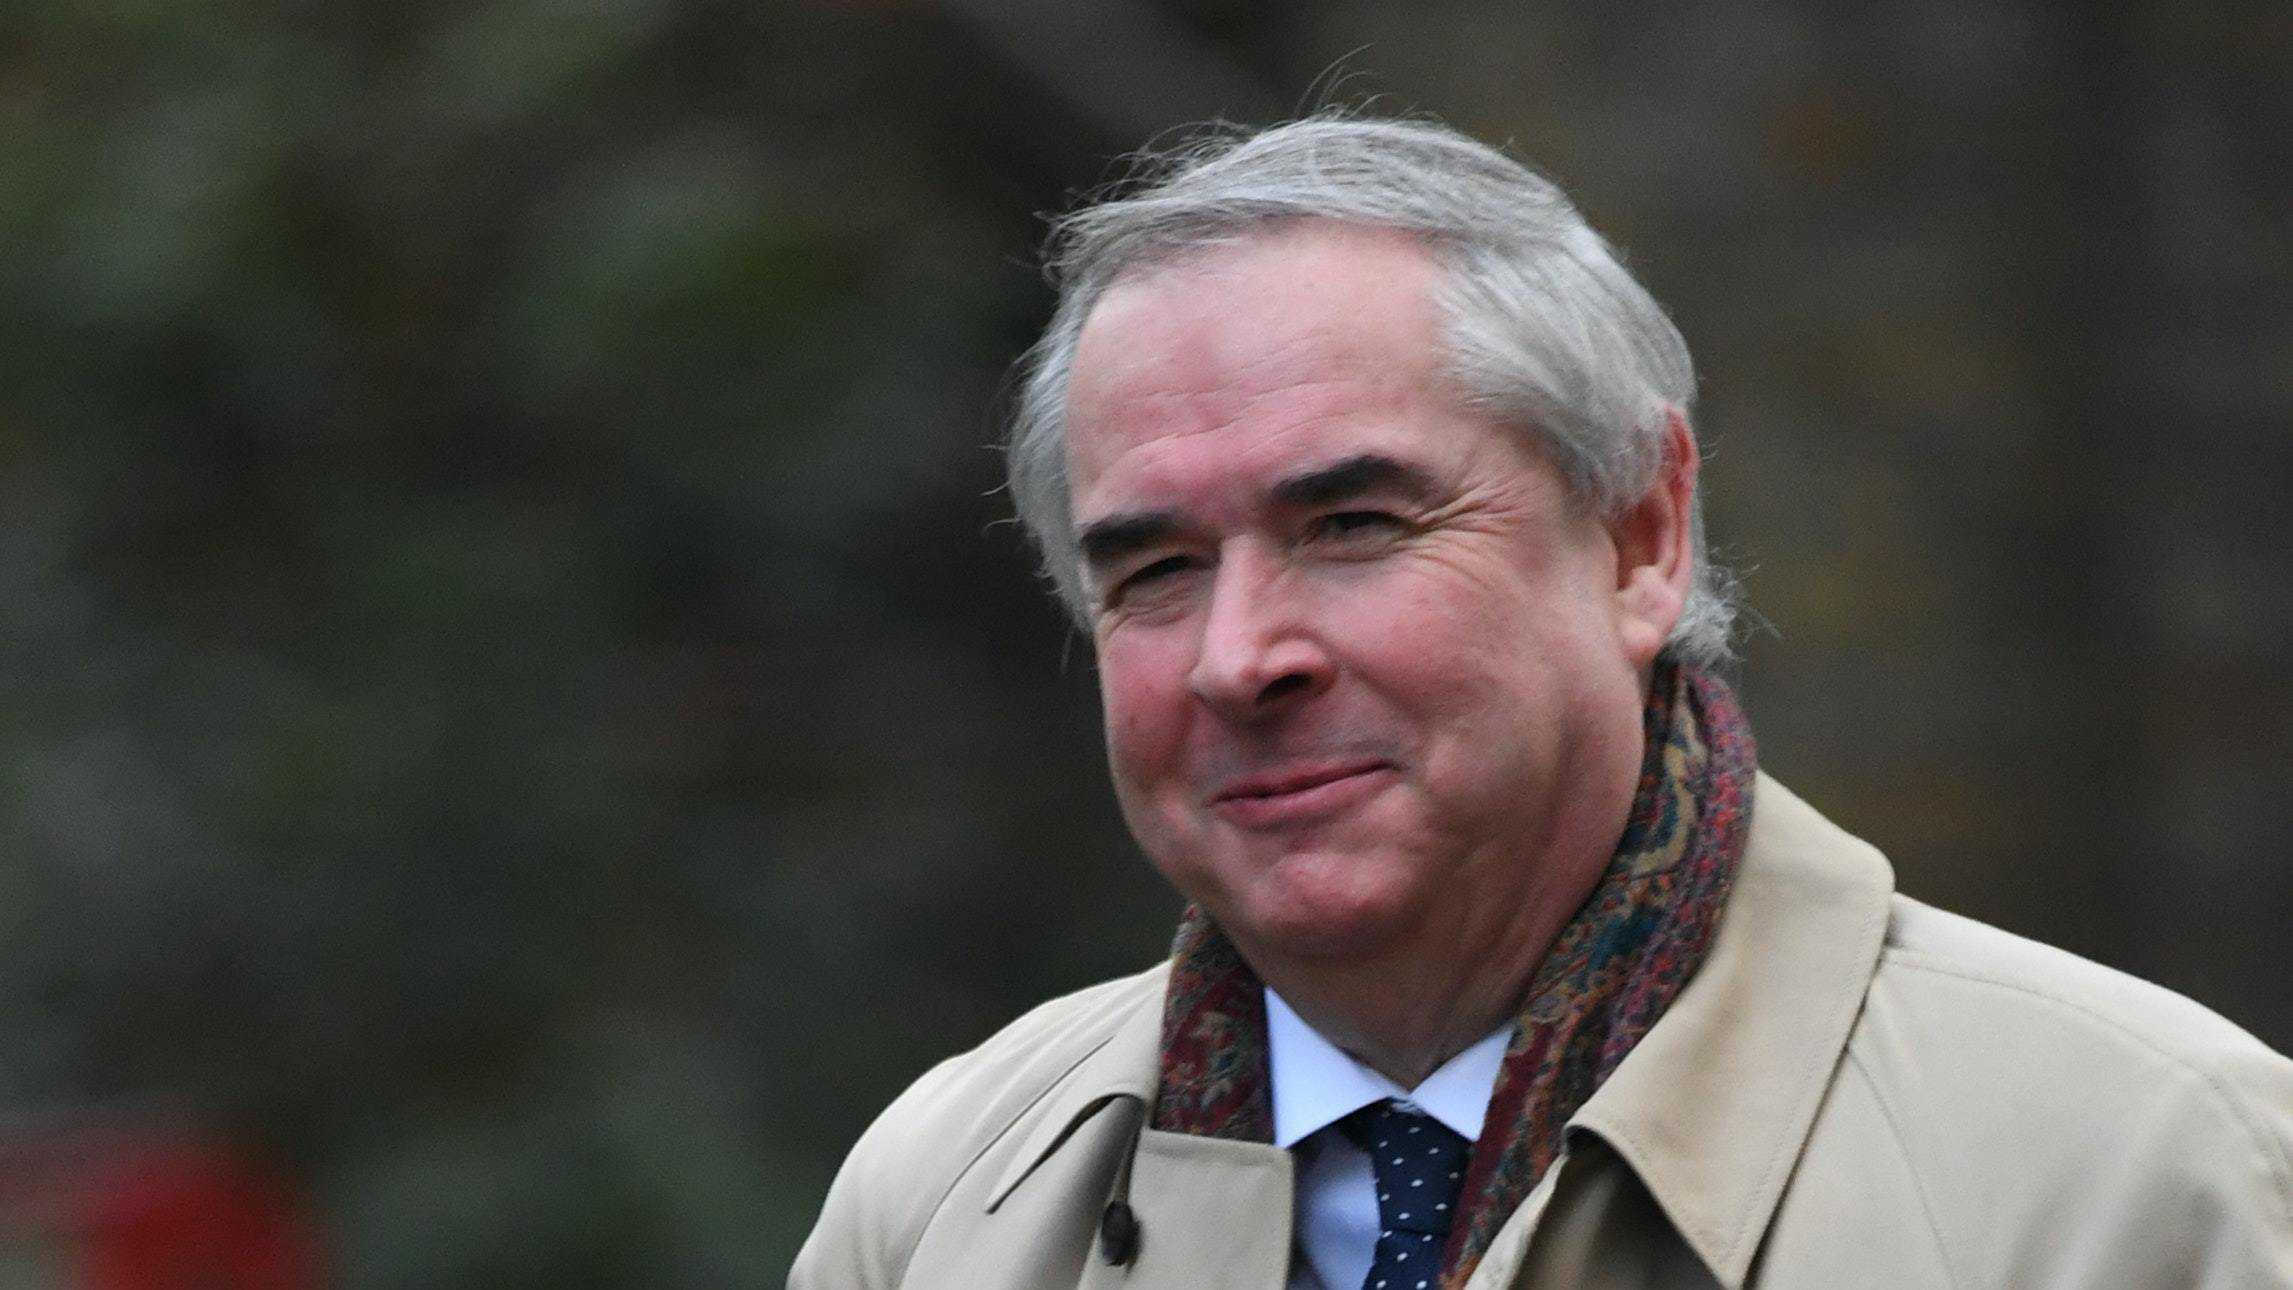 Millionaire Geoffrey Cox once claimed 49p for milk on expenses